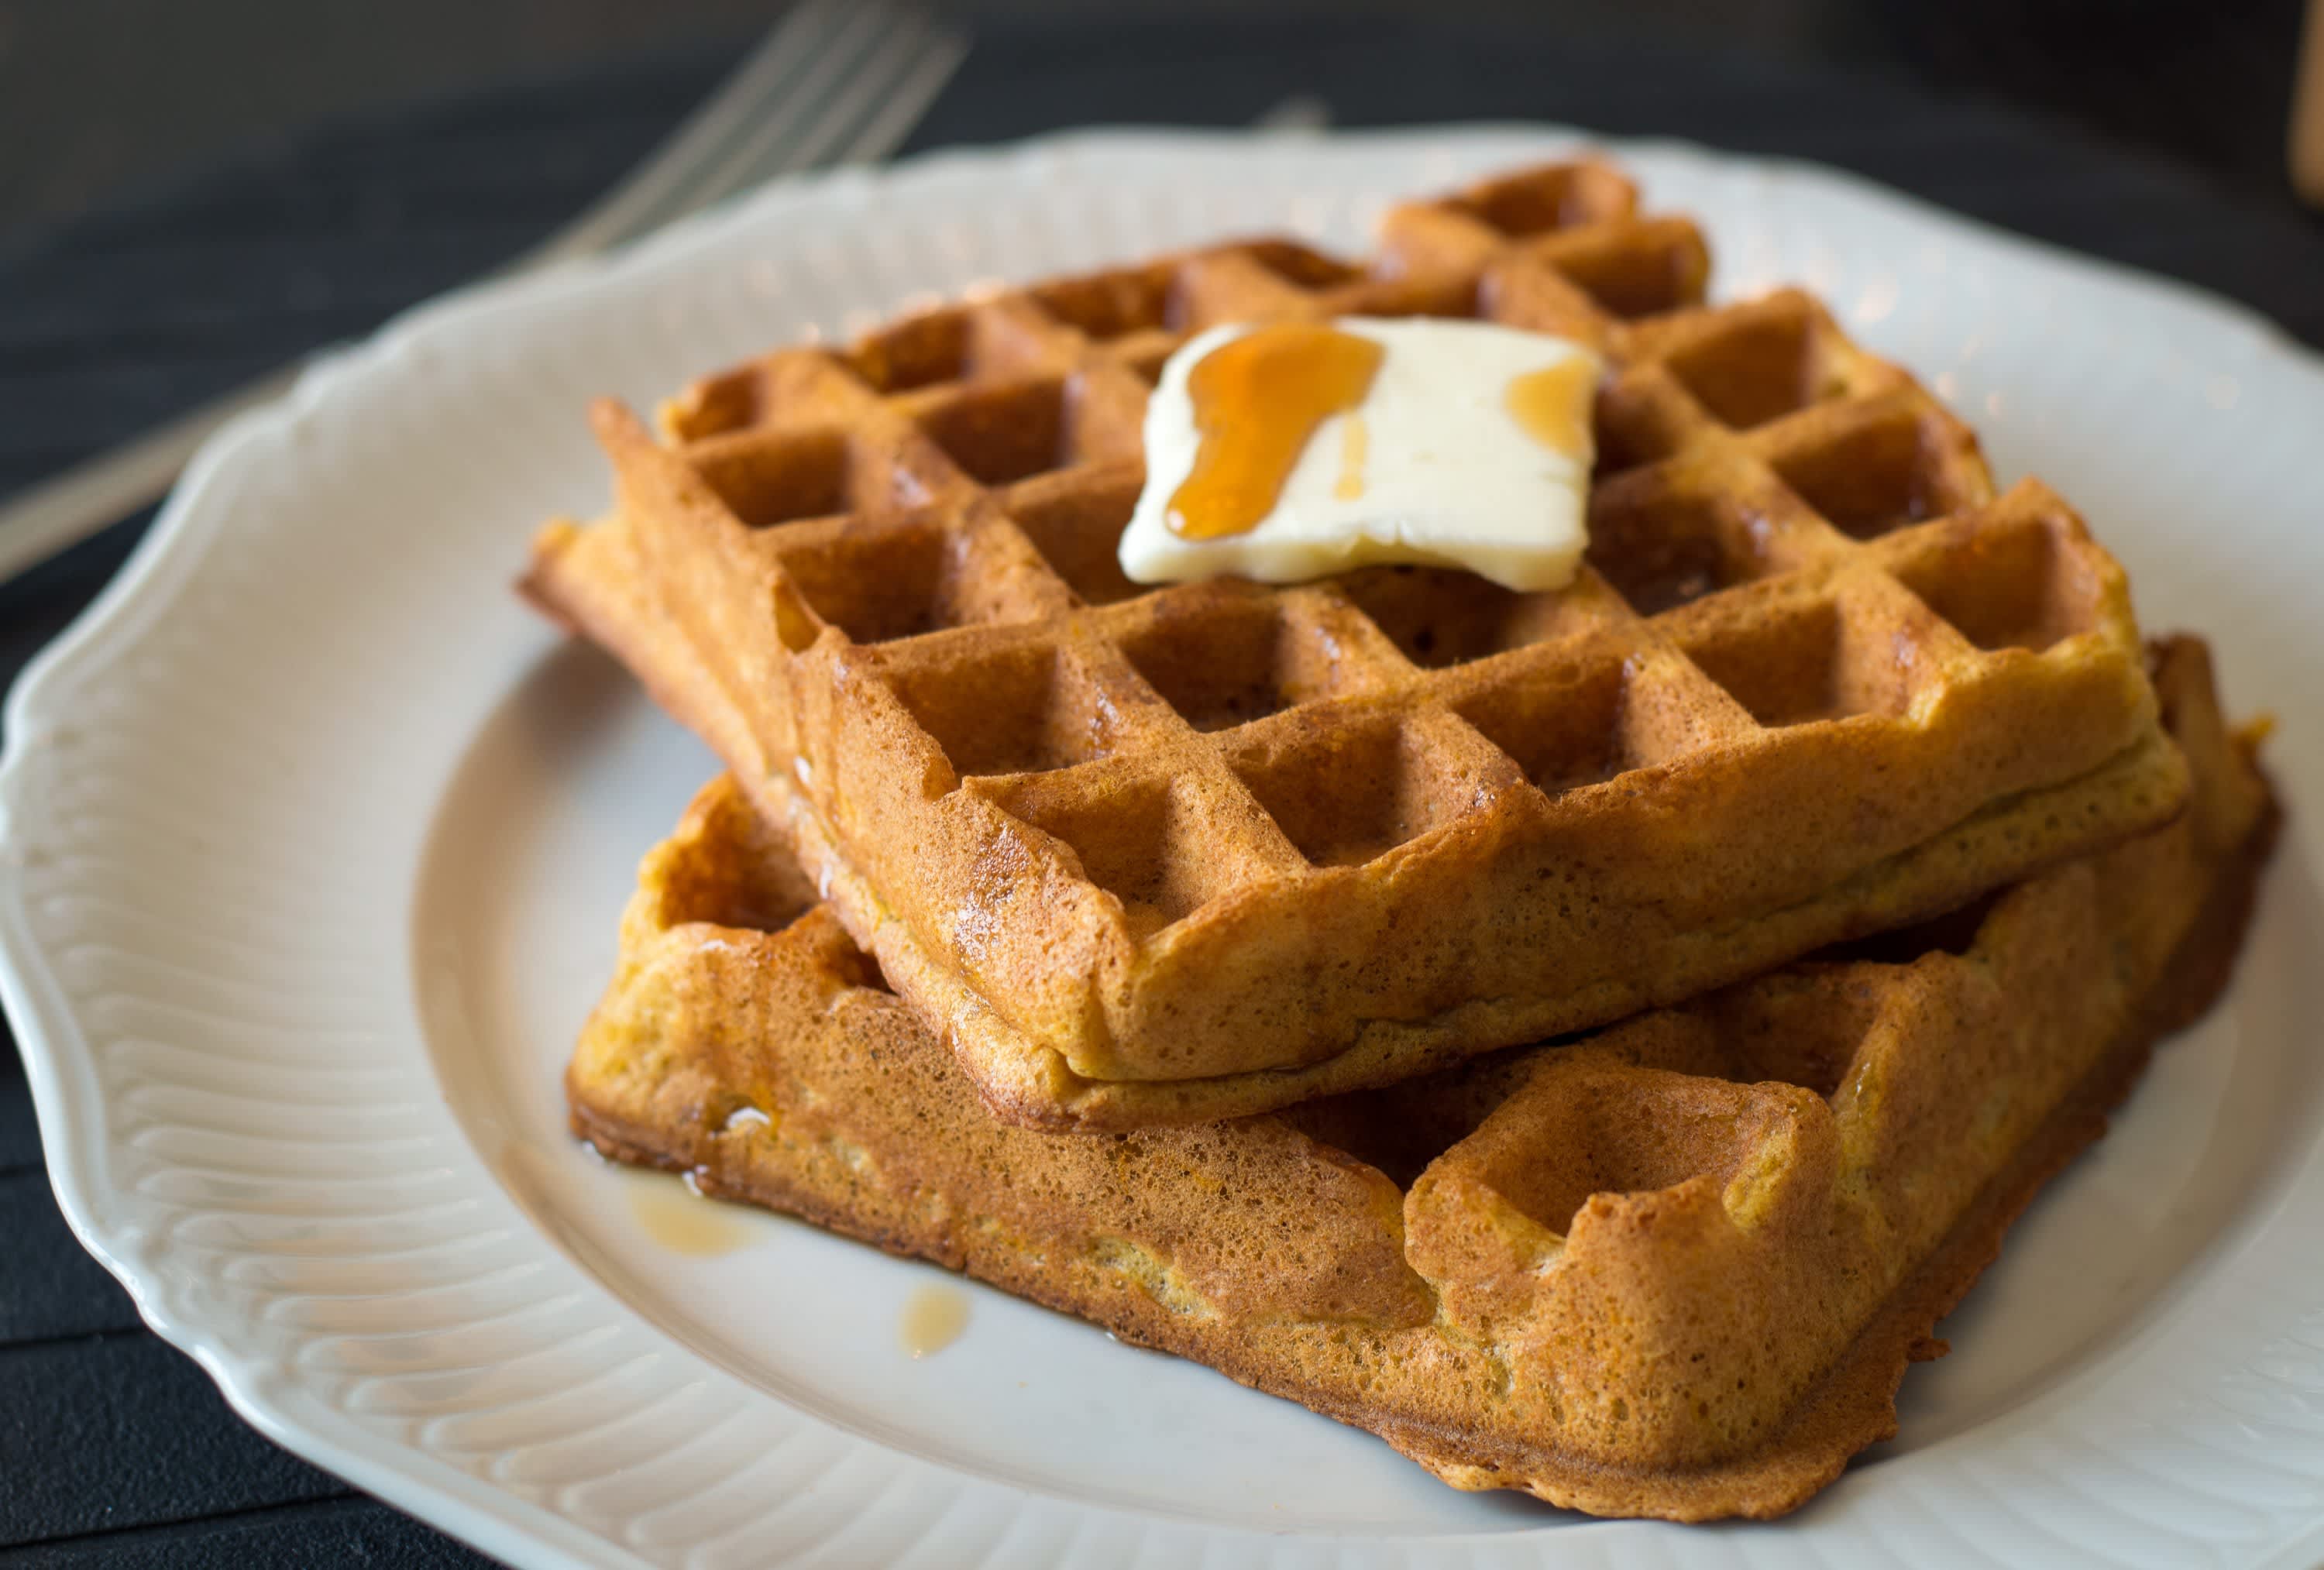 Got a new toy, knew the PERFECT way to try it out. Pumpkin stuffed waffles.  : r/traderjoes